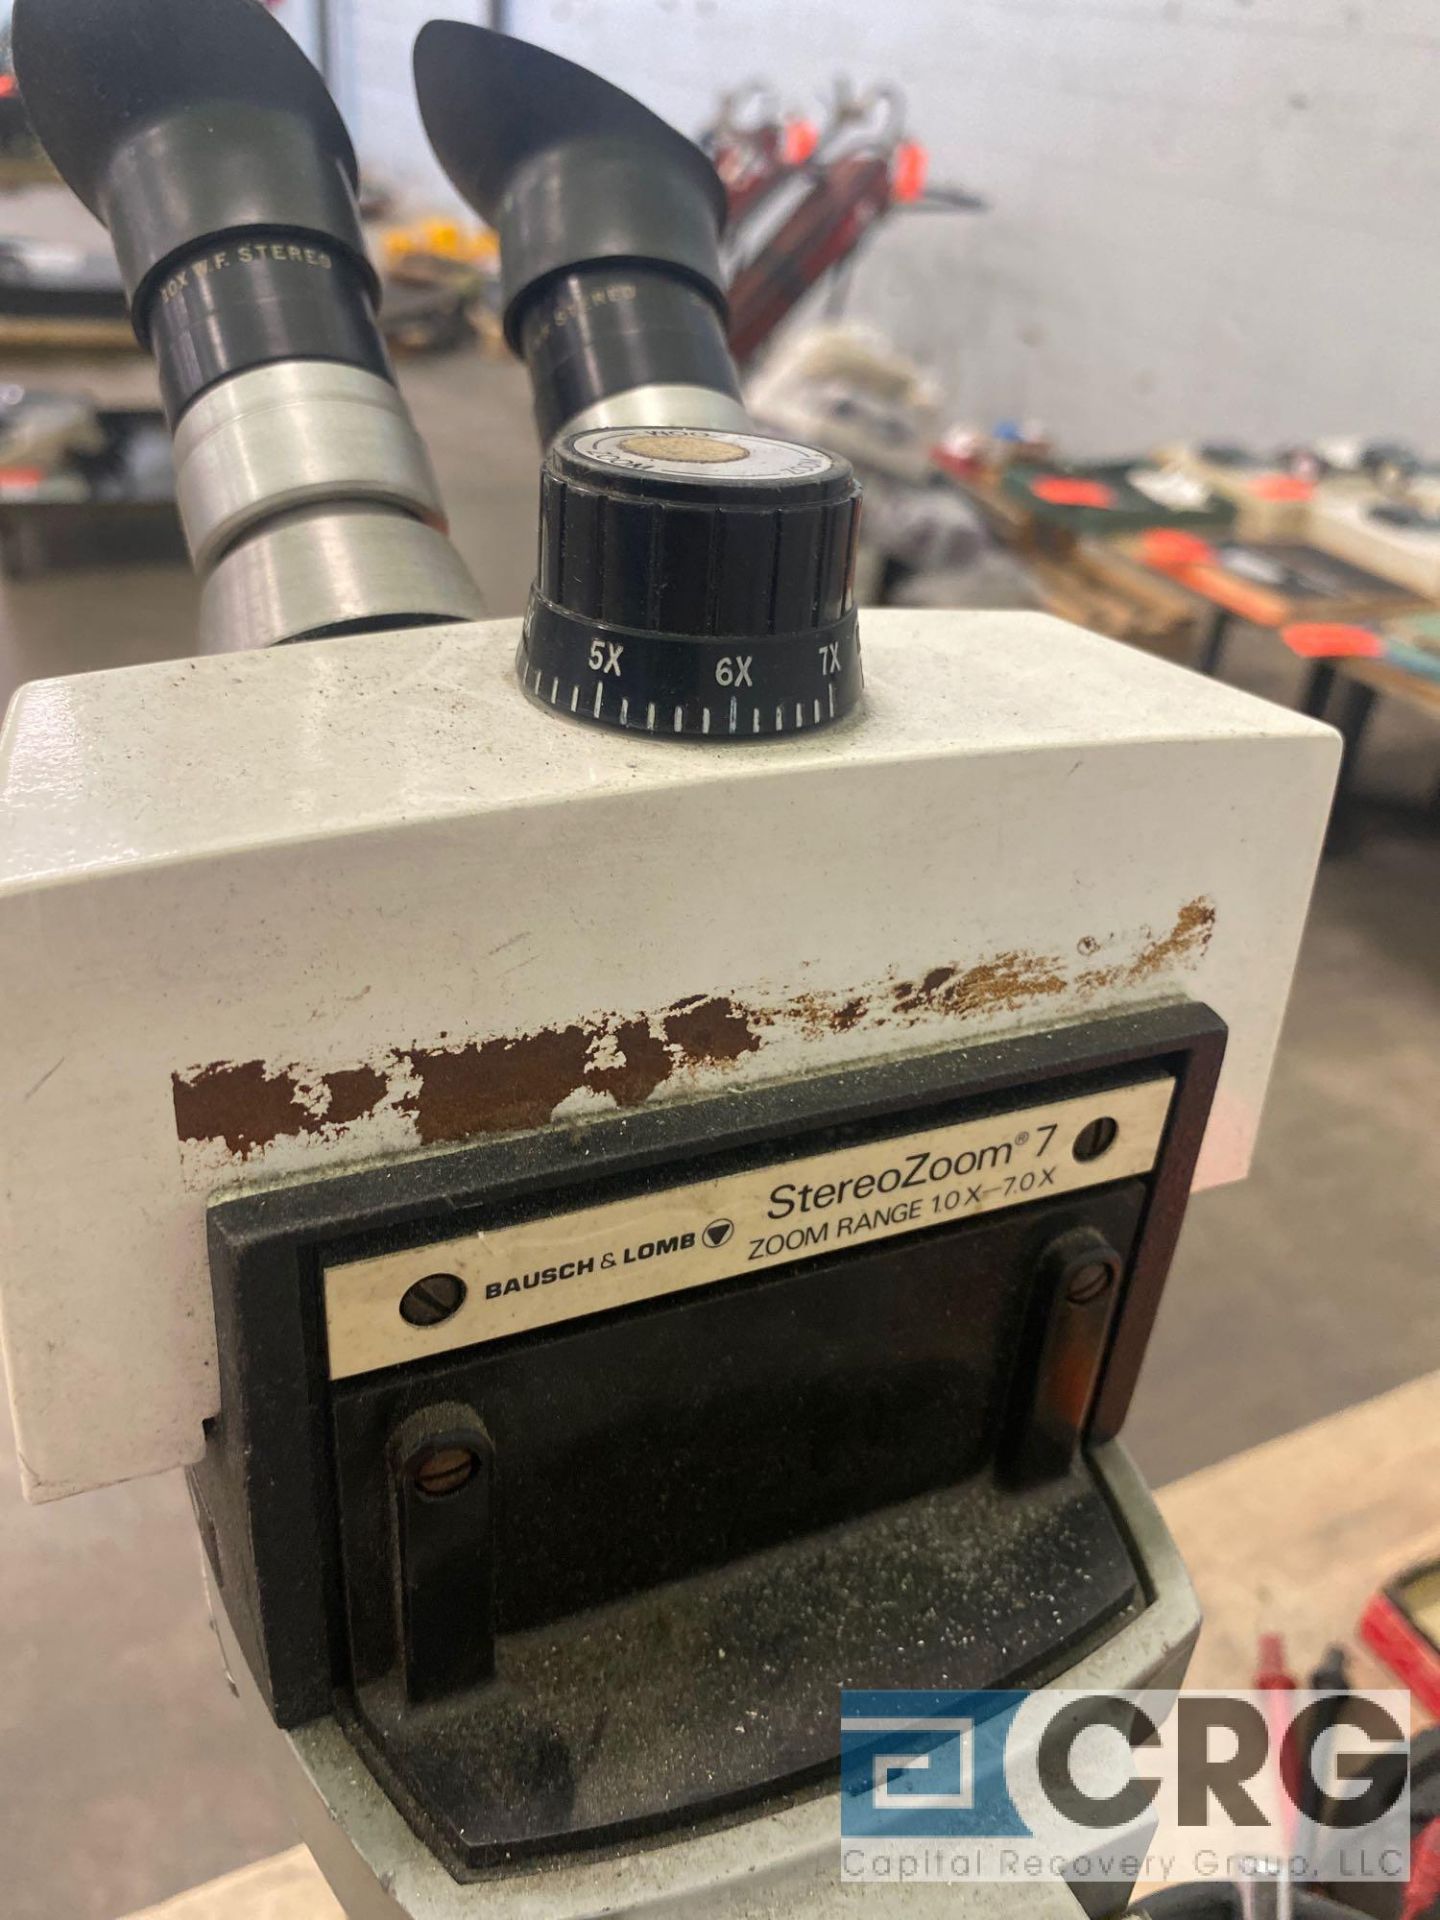 Bausch and Lomb stereoZoom 7 1x-7x microscope with spare parts - Image 2 of 4